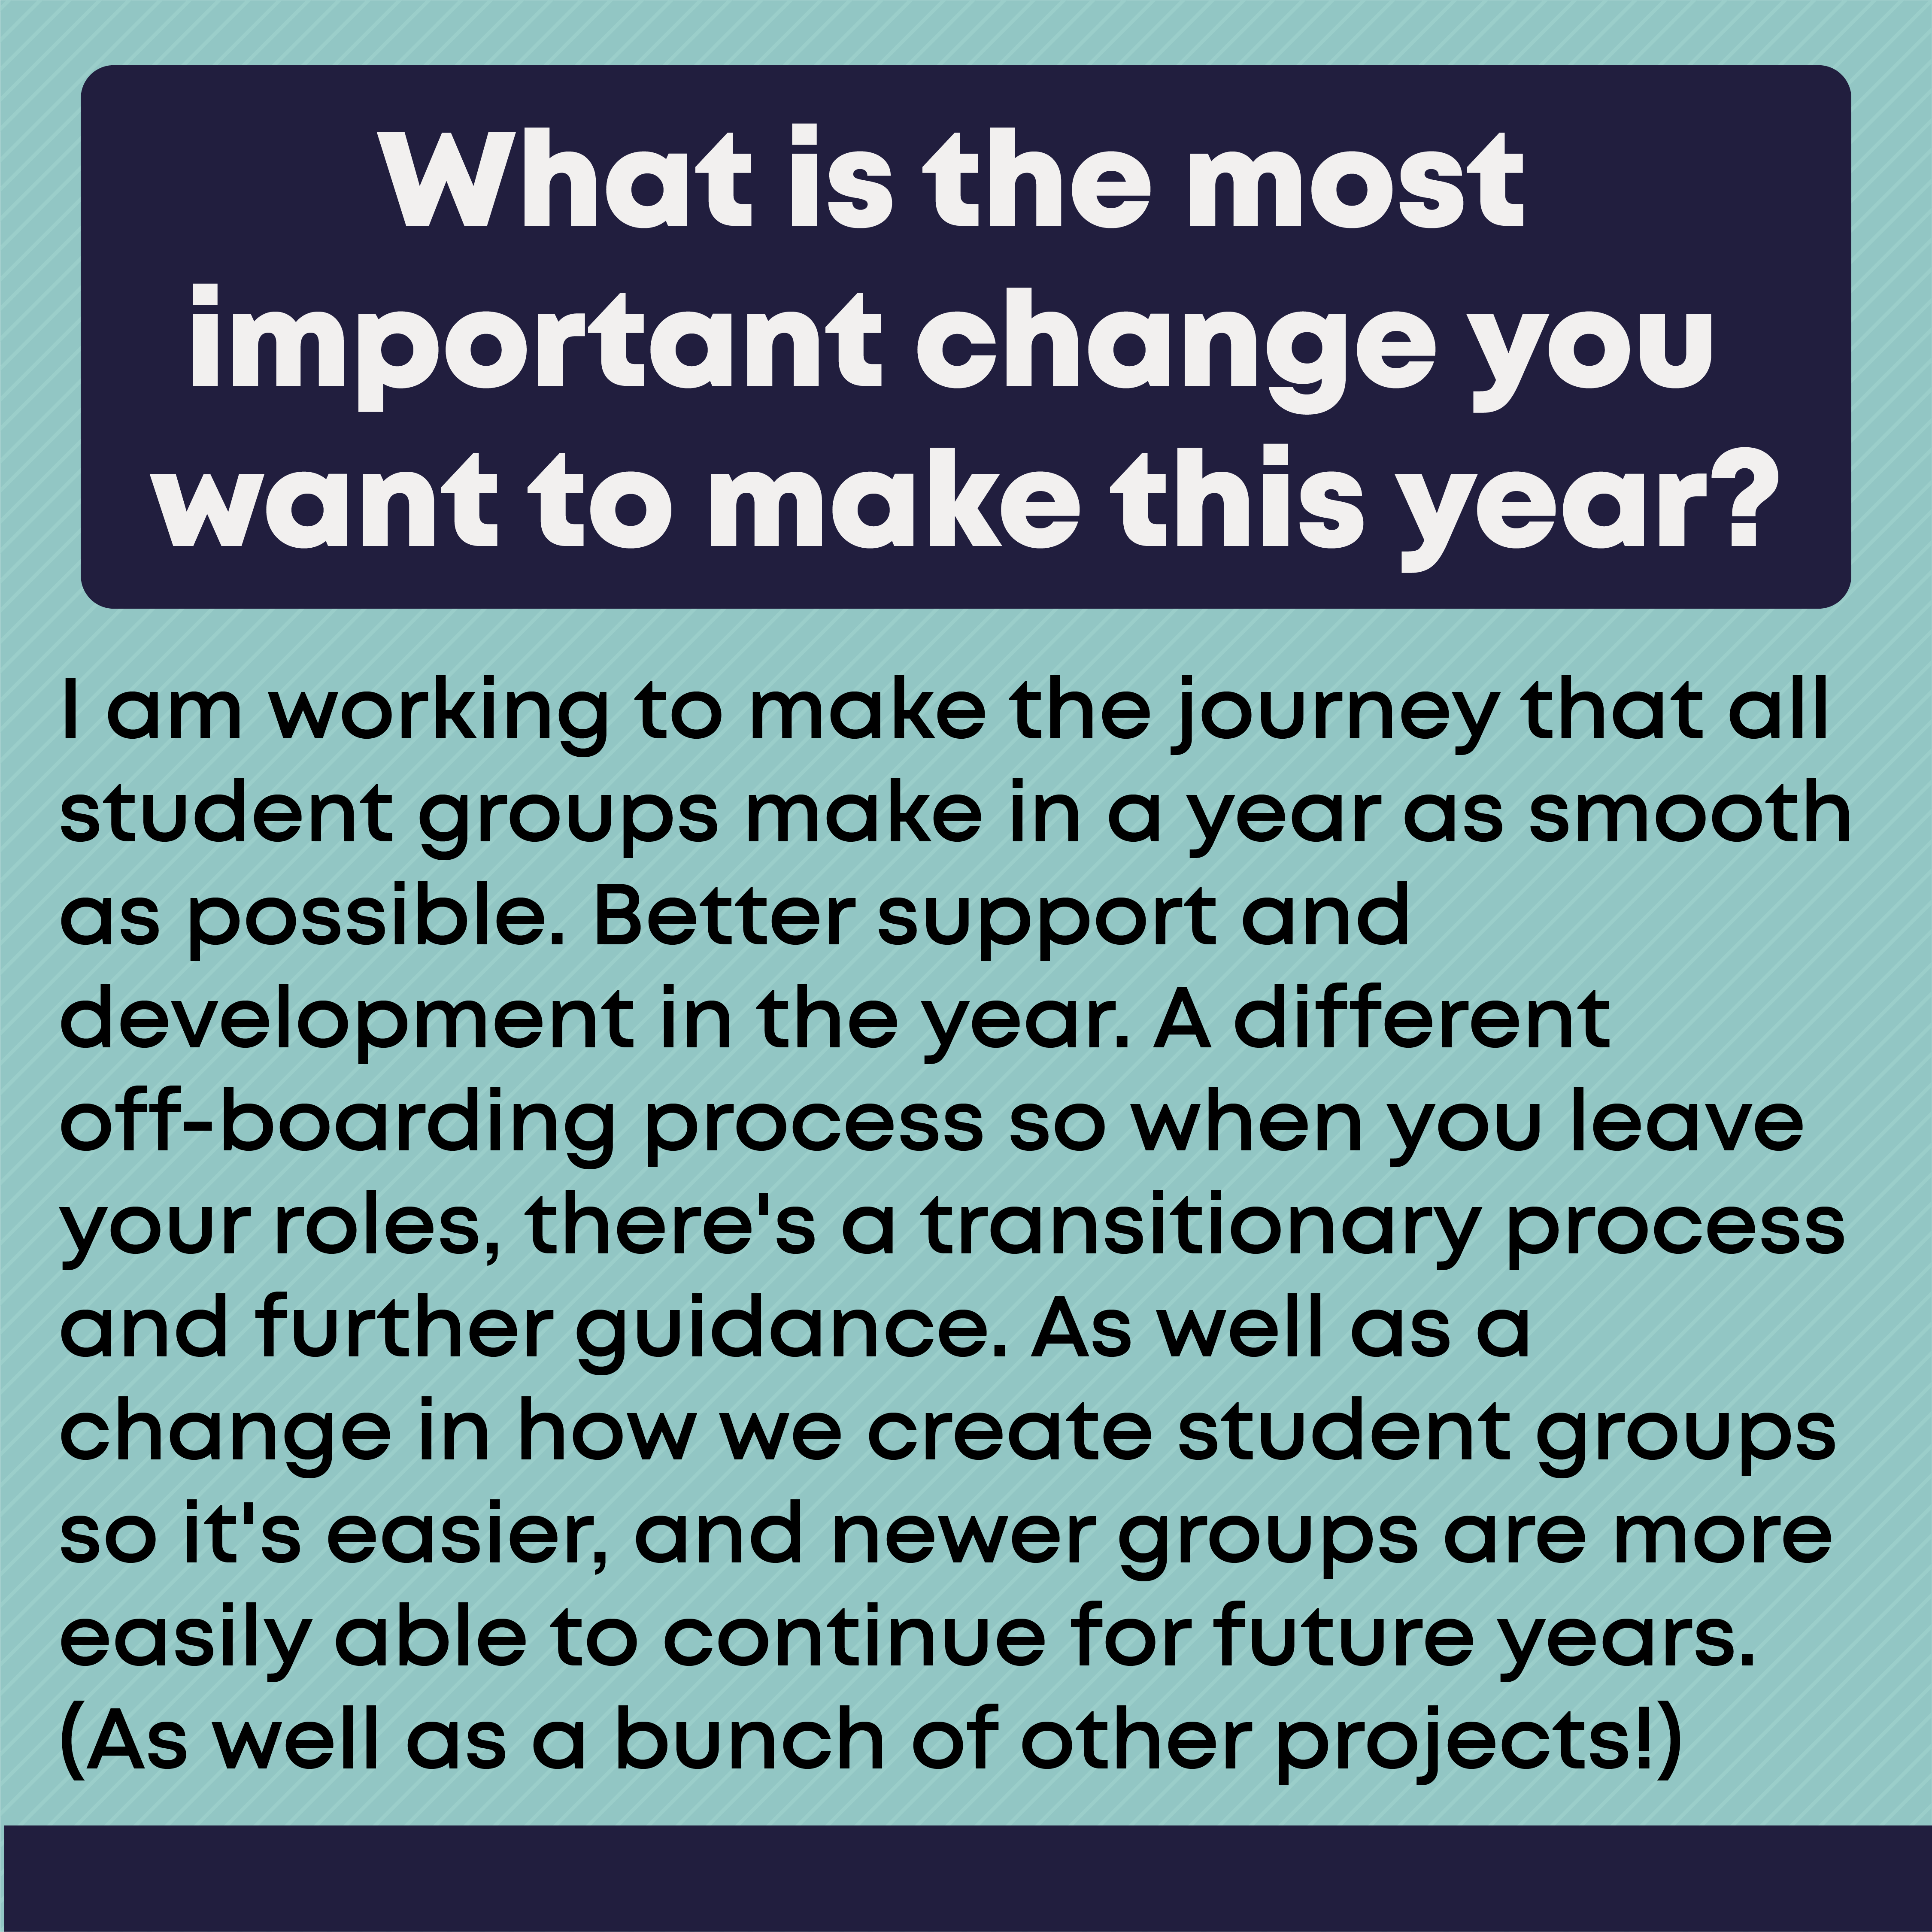 What is the most important change you want to make this year?     I am working to make the journey that all student groups make in a year as smooth as possible. Better support and development in the year. A different off-boarding process so when you leave your roles, there's a transitionary process and further guidance. As well as a change in how we create student groups so it's easier, and newer groups are more easily able to continue for future years. (As well as a bunch of other projects!)